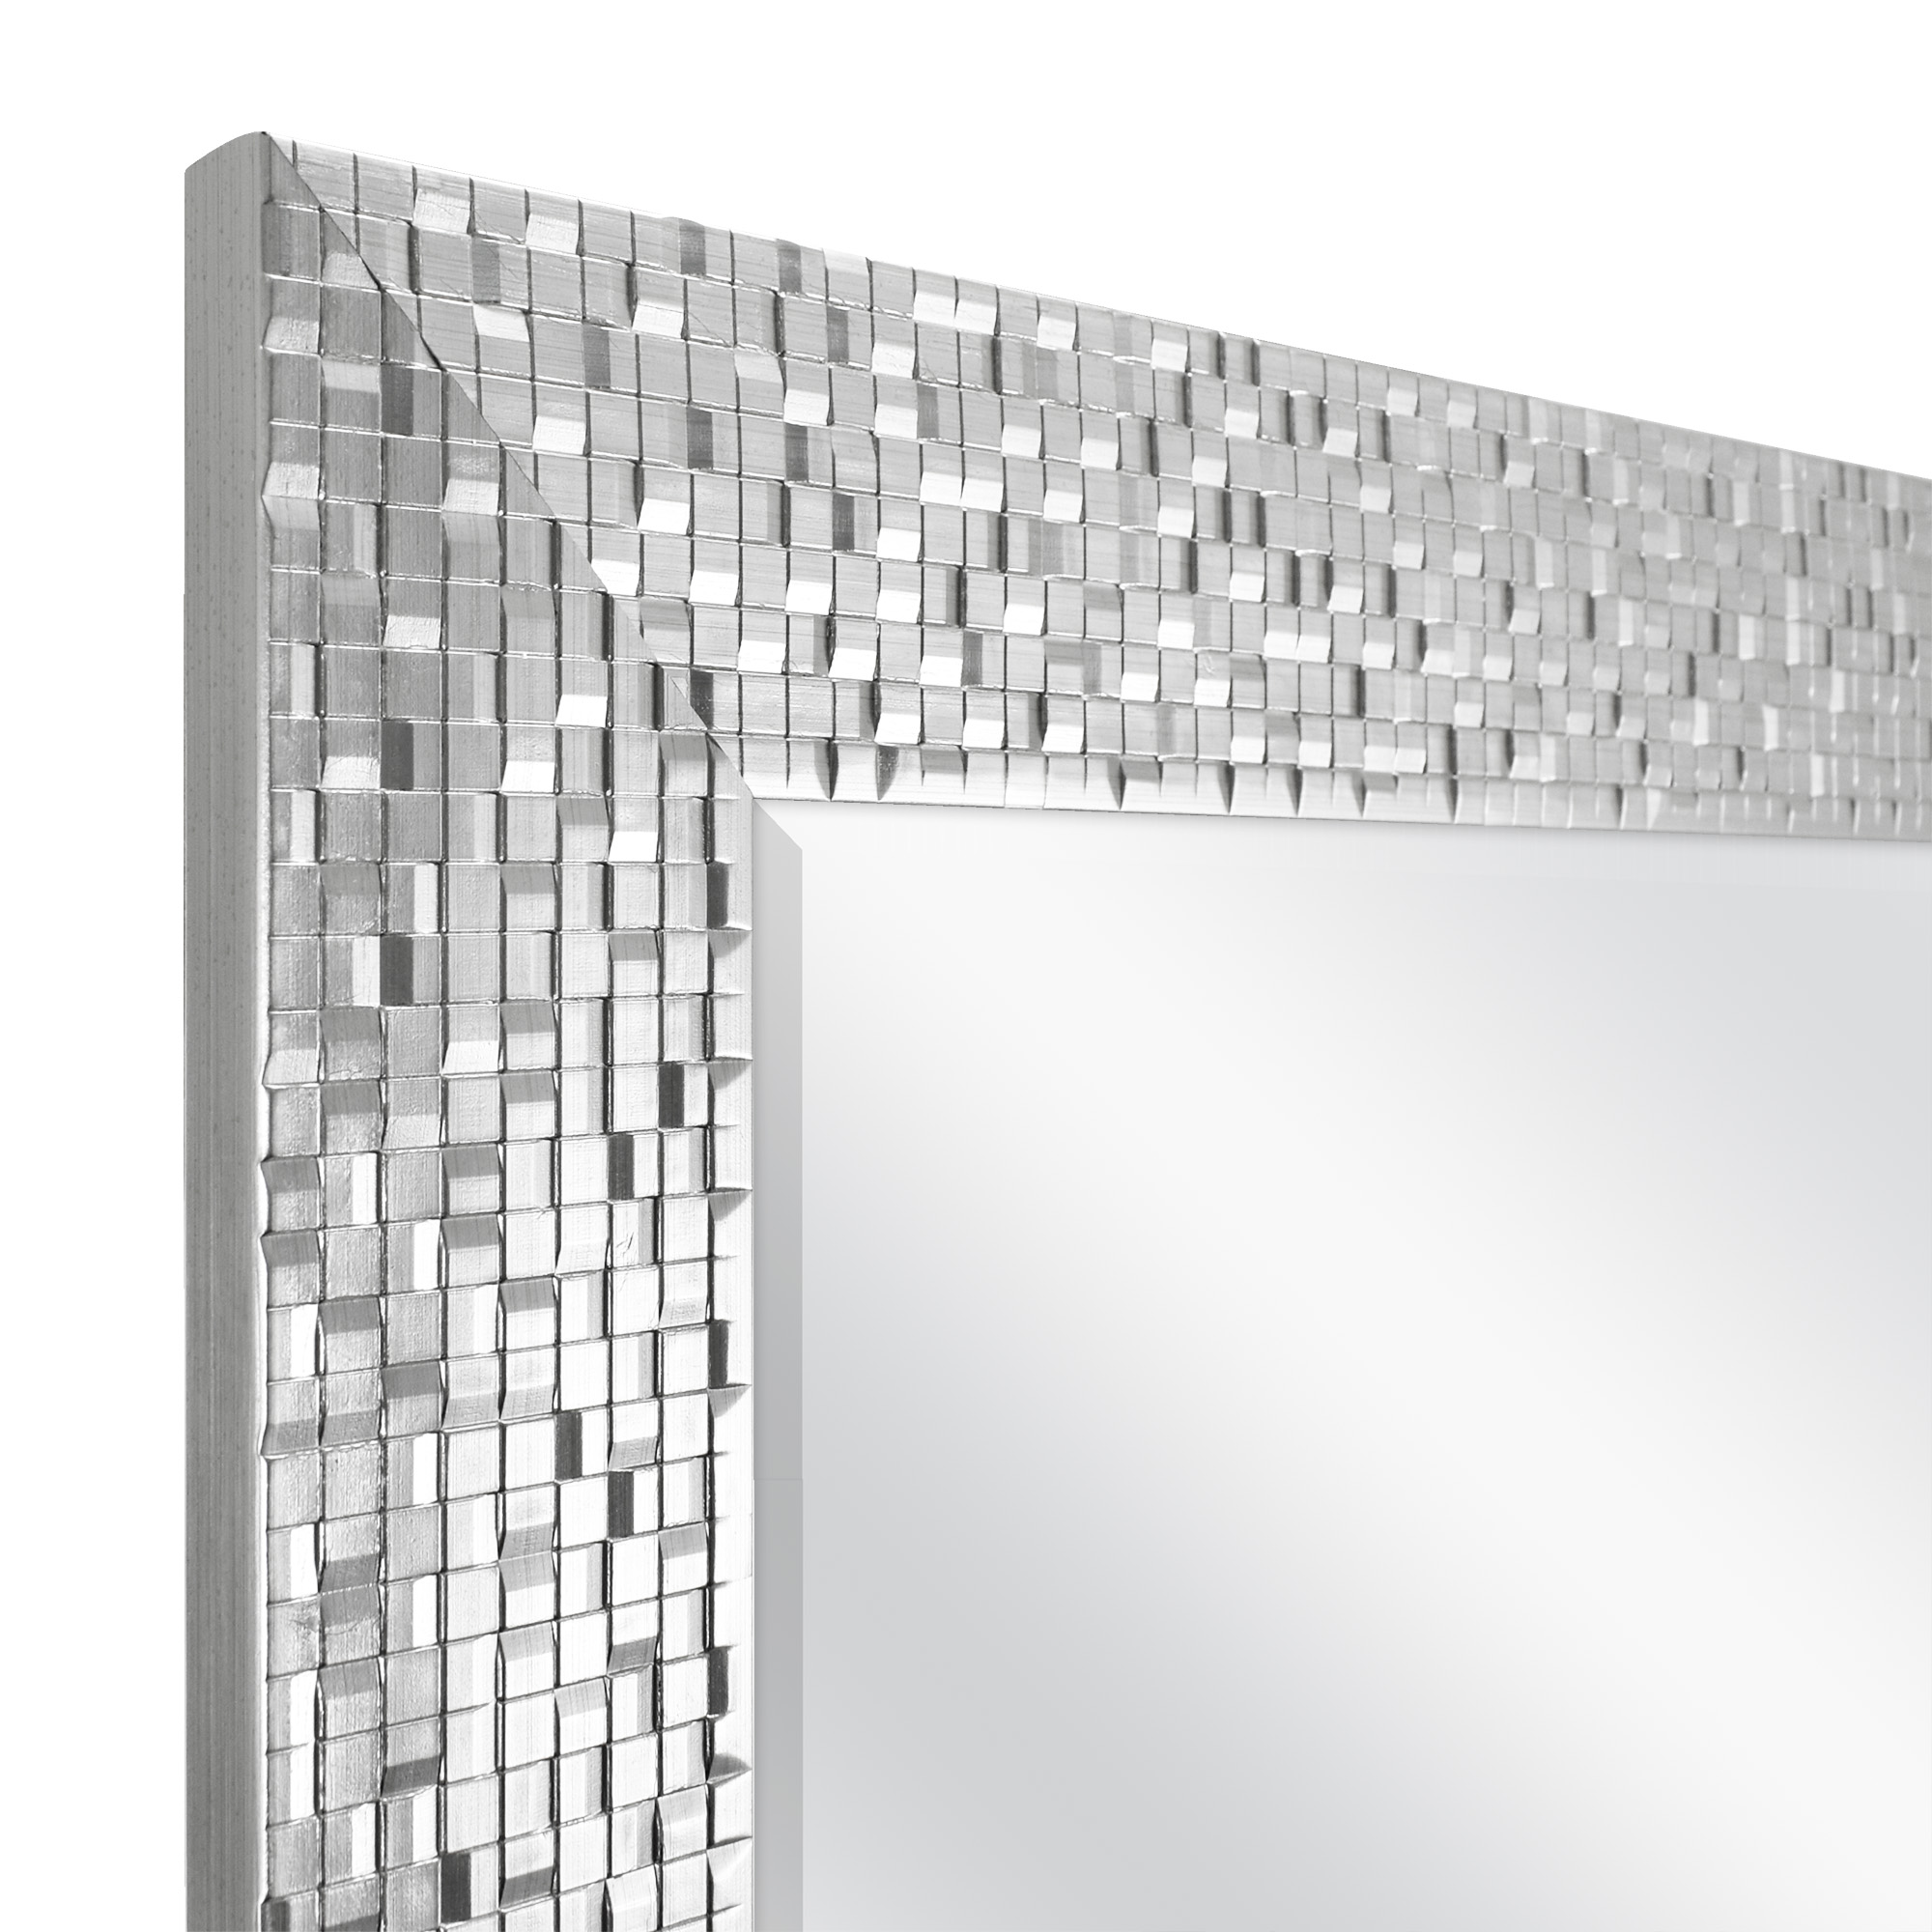 Better Homes & Gardens Silver Glam Mosaic Tile Wall Mirror, 23x28 Inch - image 4 of 7